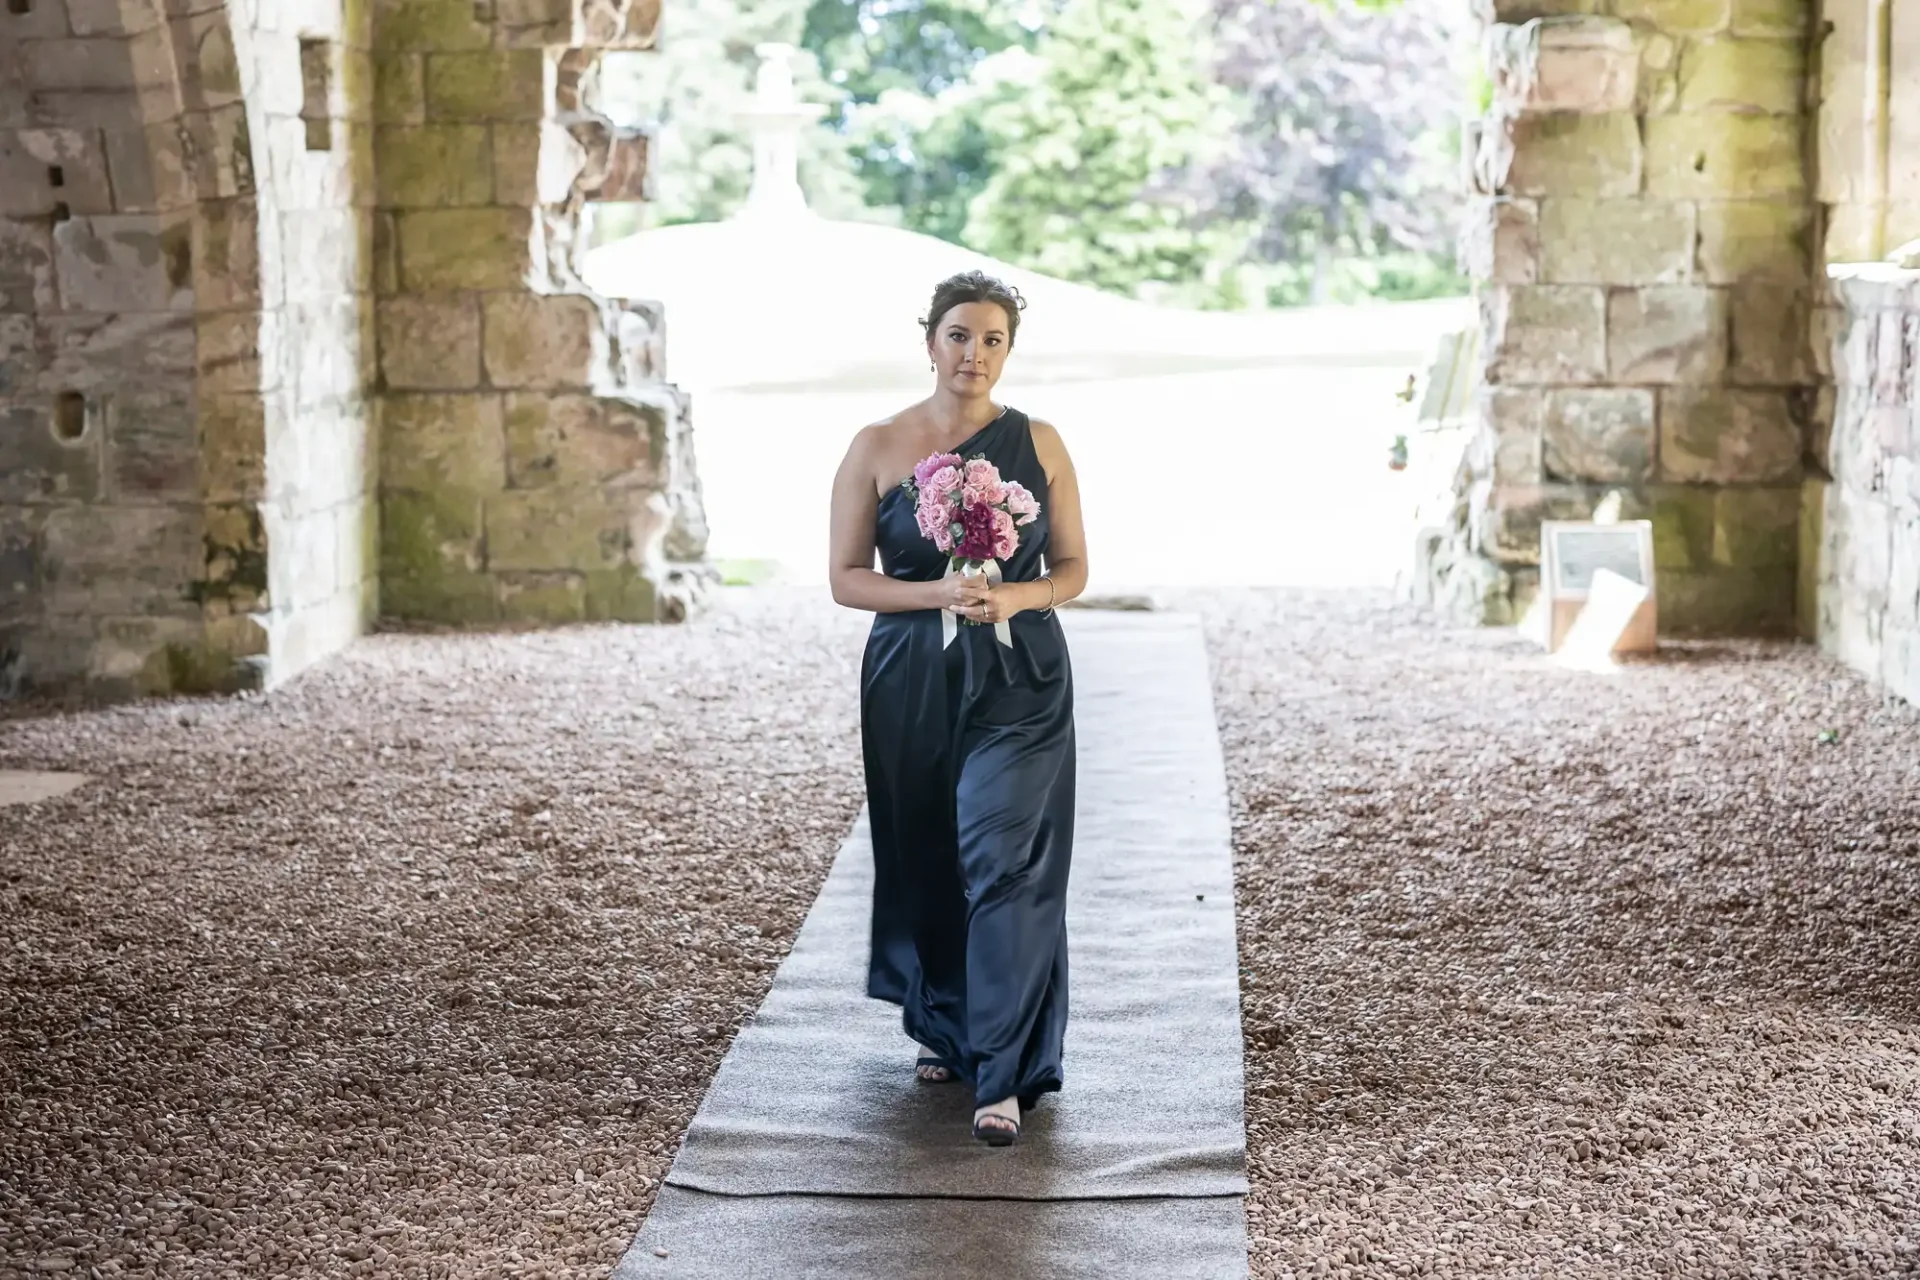 A woman in a navy dress walks down a stone aisle holding a bouquet, in a historic building with arches.